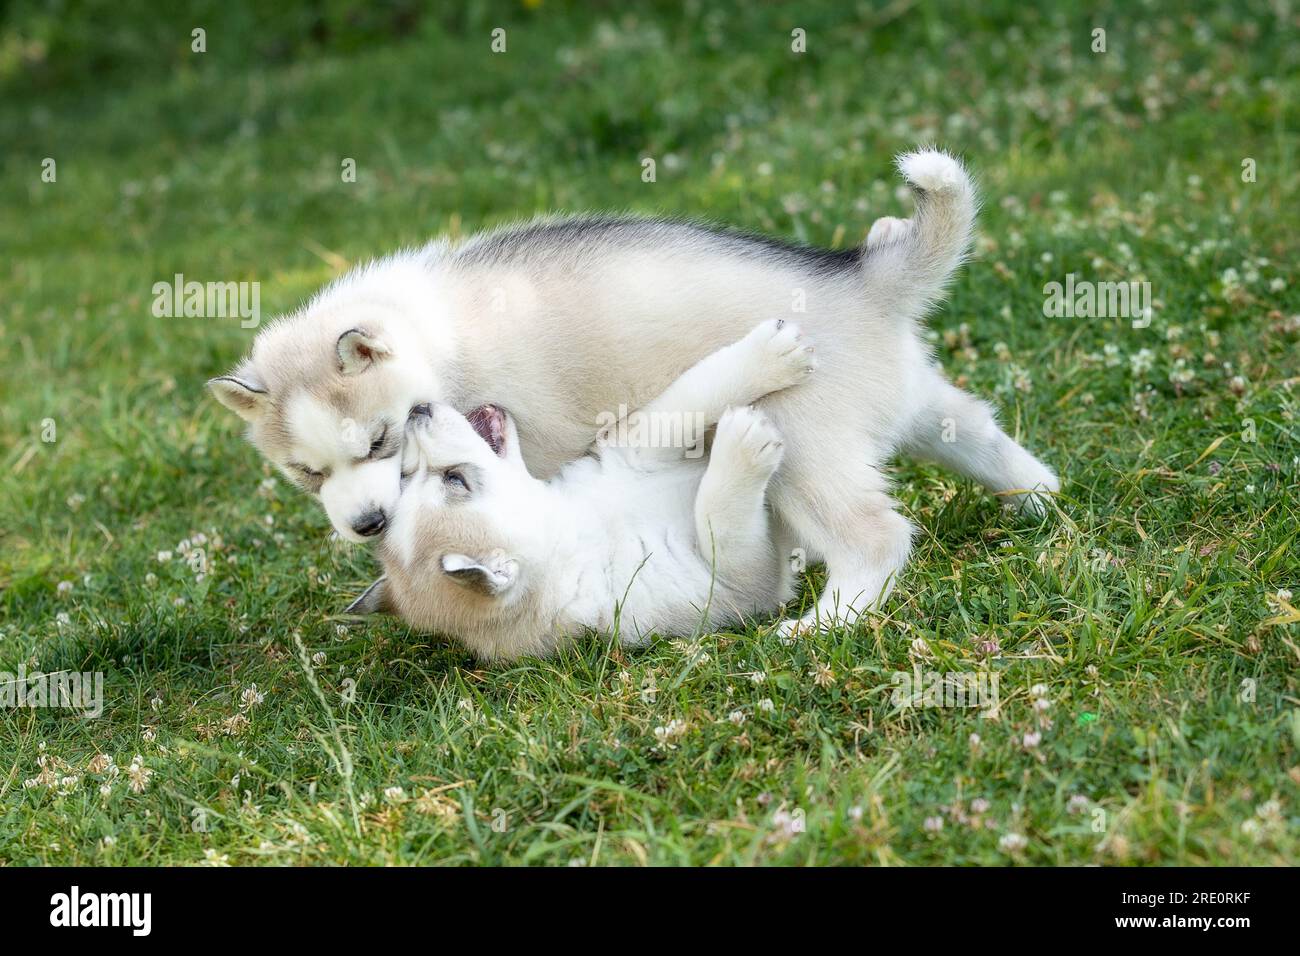 Two Siberian Husky dog puppies play outdoors in the grass Stock Photo